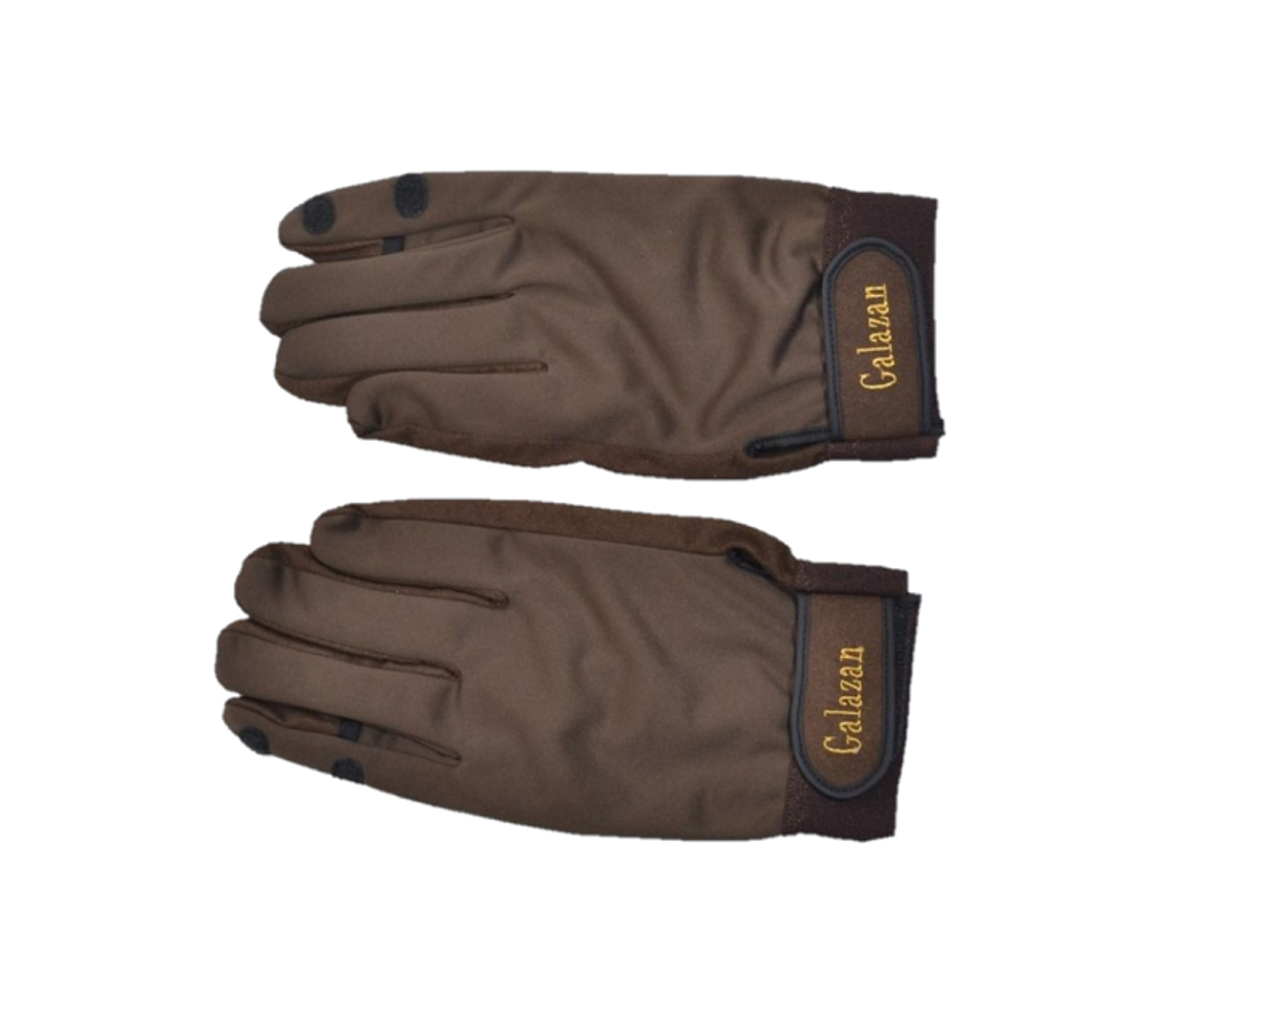 Light Weight Hunting/Shooting Gloves